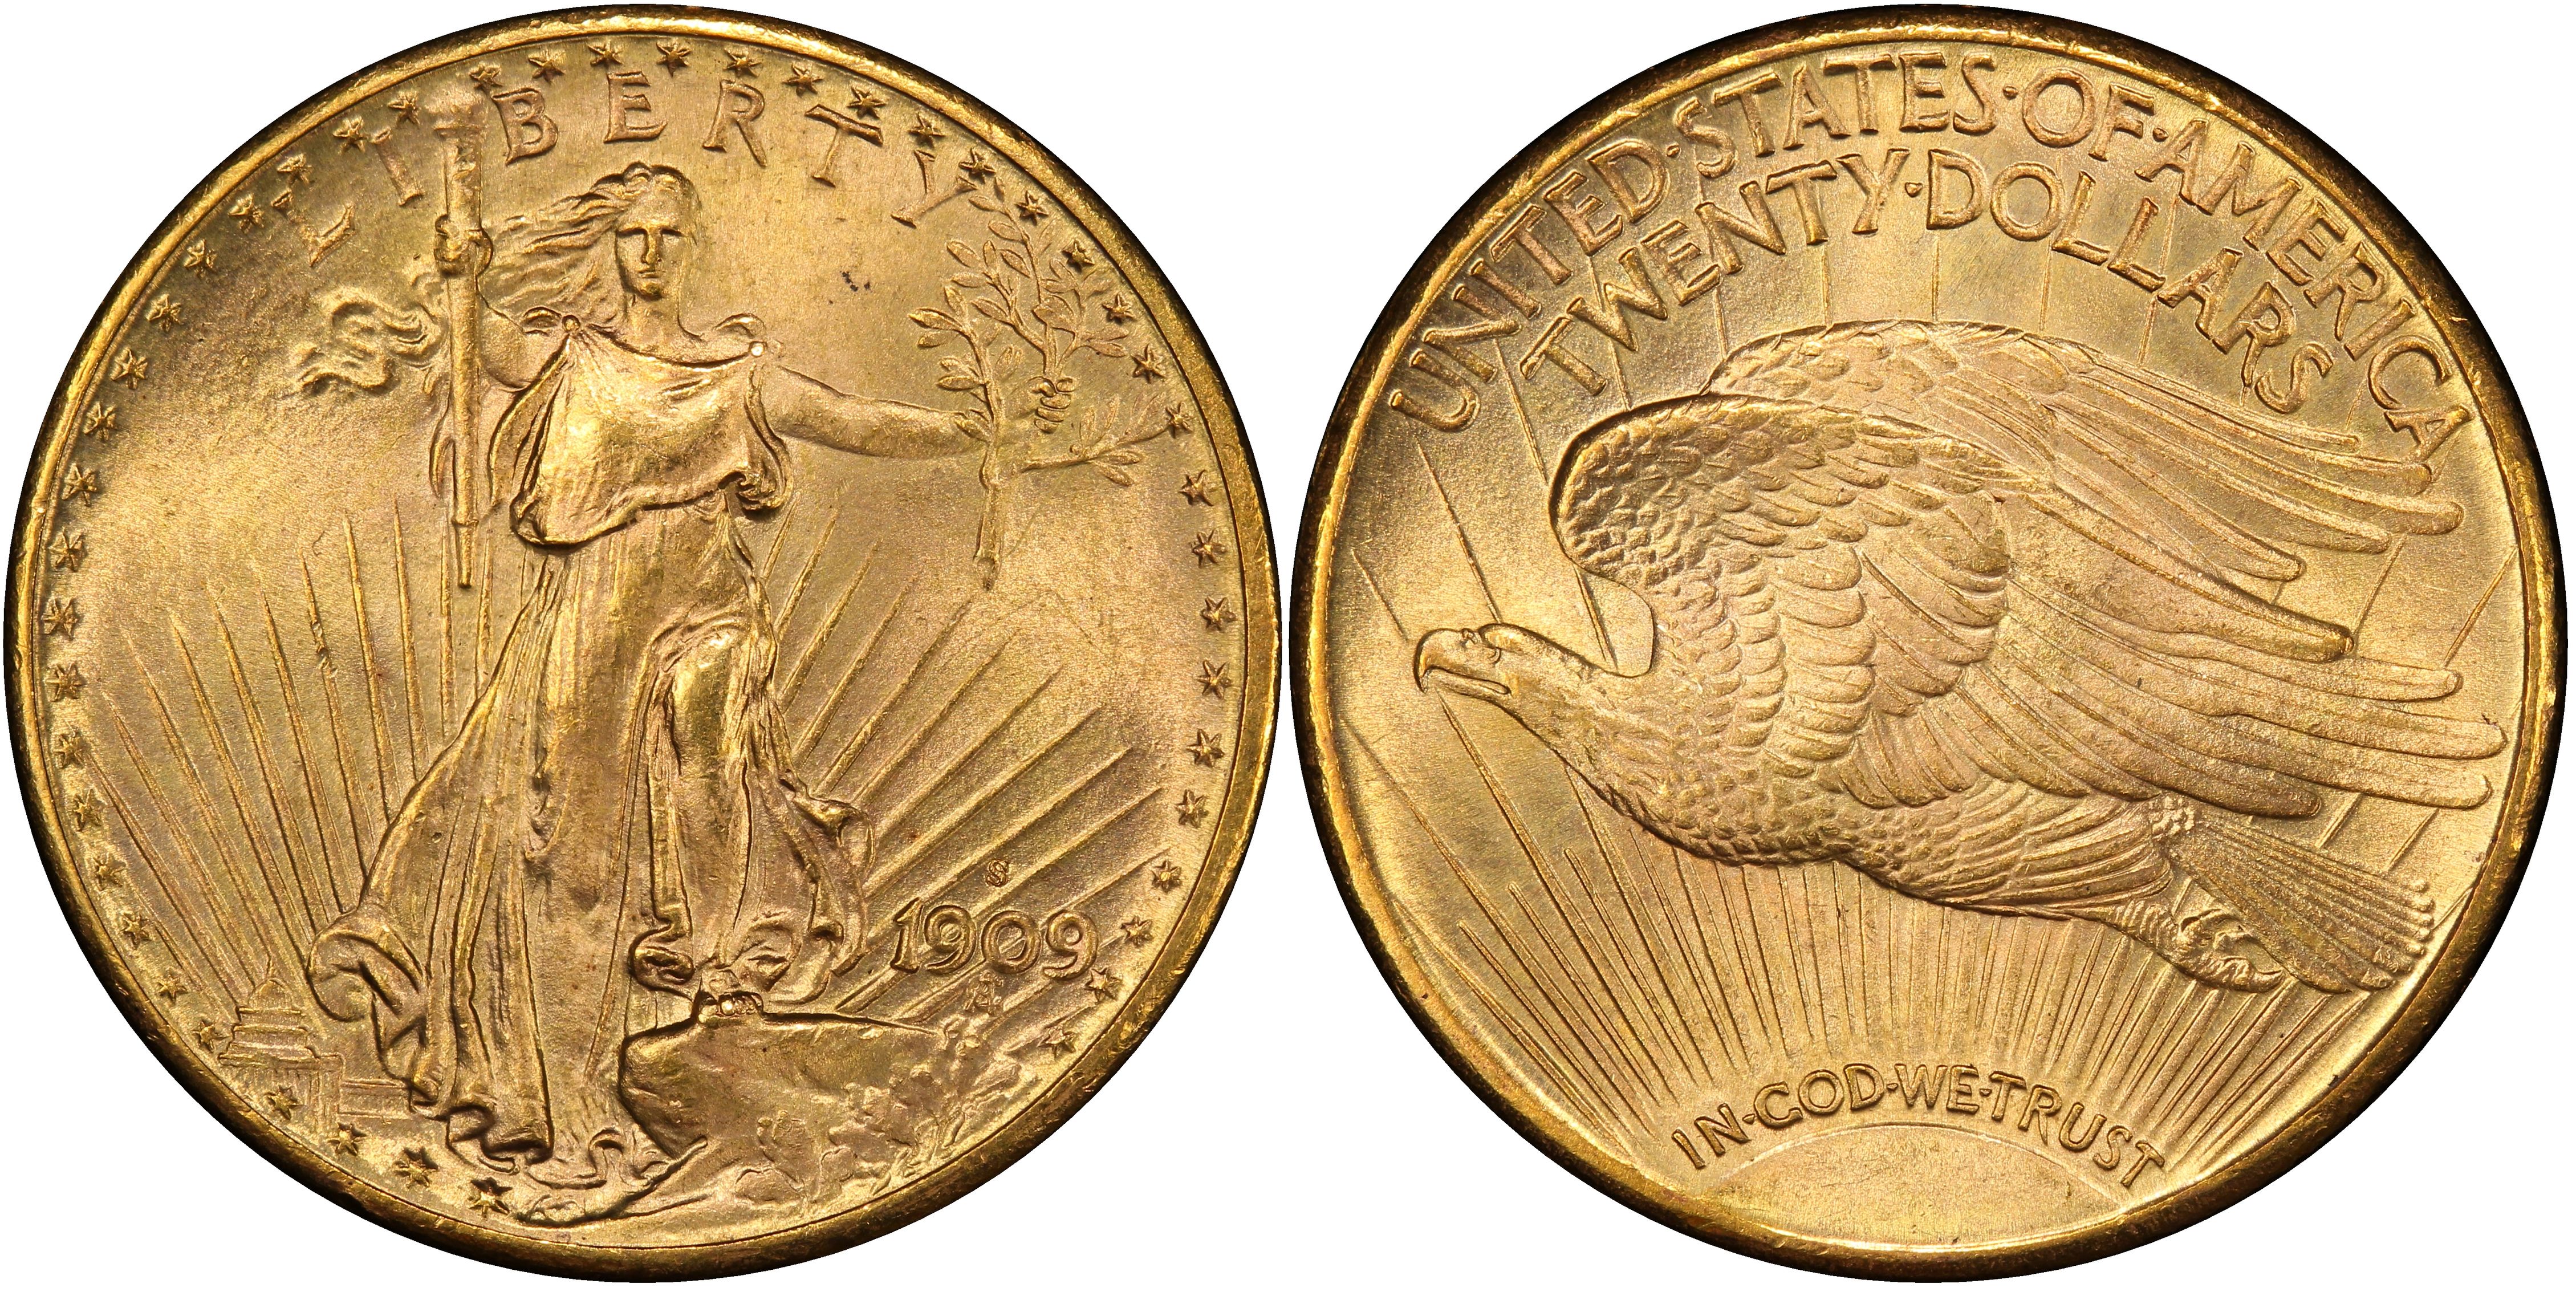 Gaudens　MS　Eagle　#gct-wr-012466-8208-　Rive　Gold　Collection　Saint　$20　[送料無料]　Coin　金貨　Double　63　アンティークコイン　PCGS　1909-S　d´Or